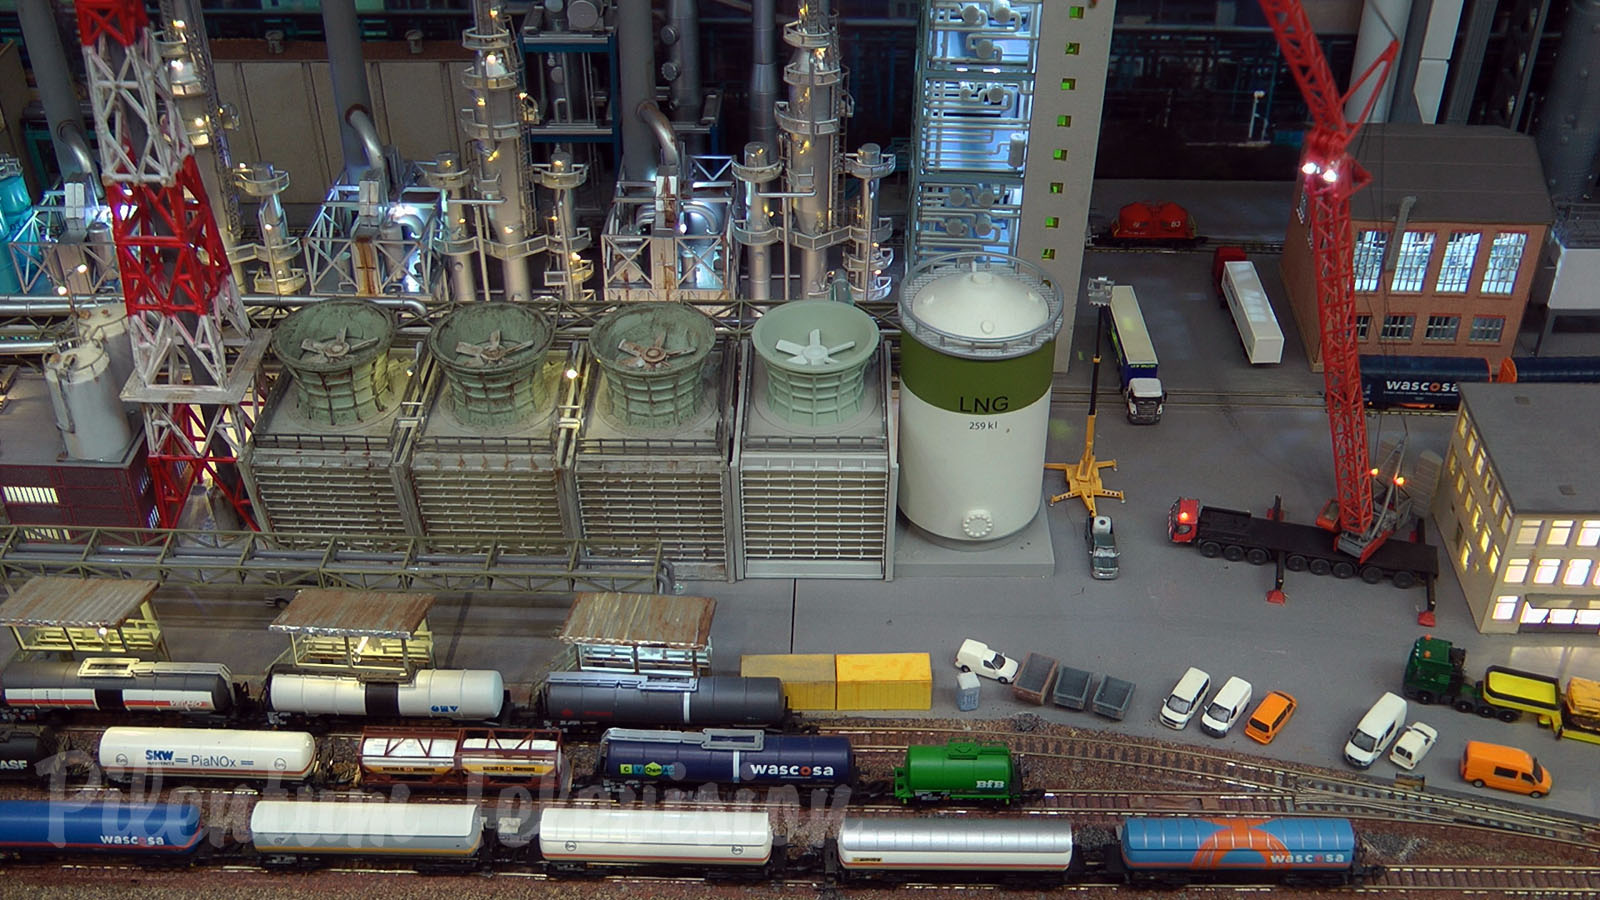 Incredibly detailed model railroad layout of a miniature chemical plant in Z scale